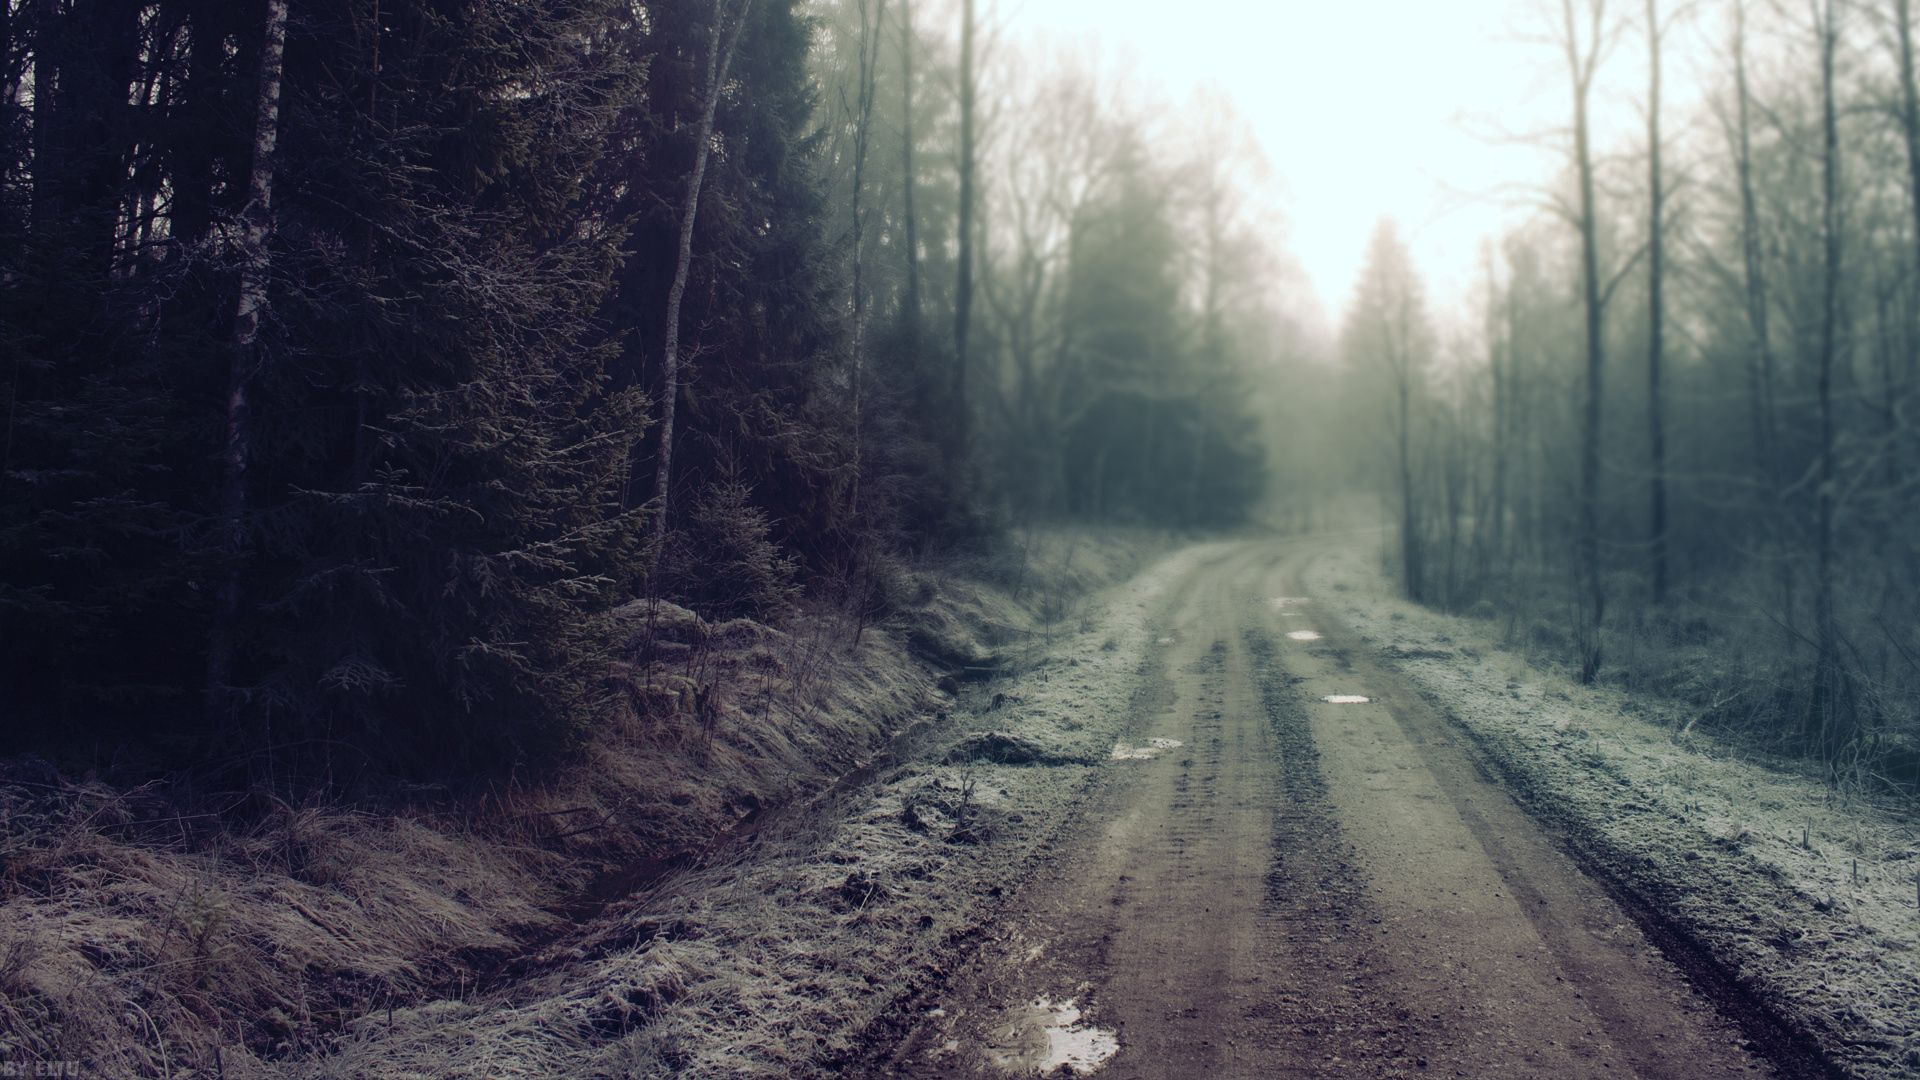 gloomy, nature, road, forest, country, secret, mystery, puddles, countryside mobile wallpaper